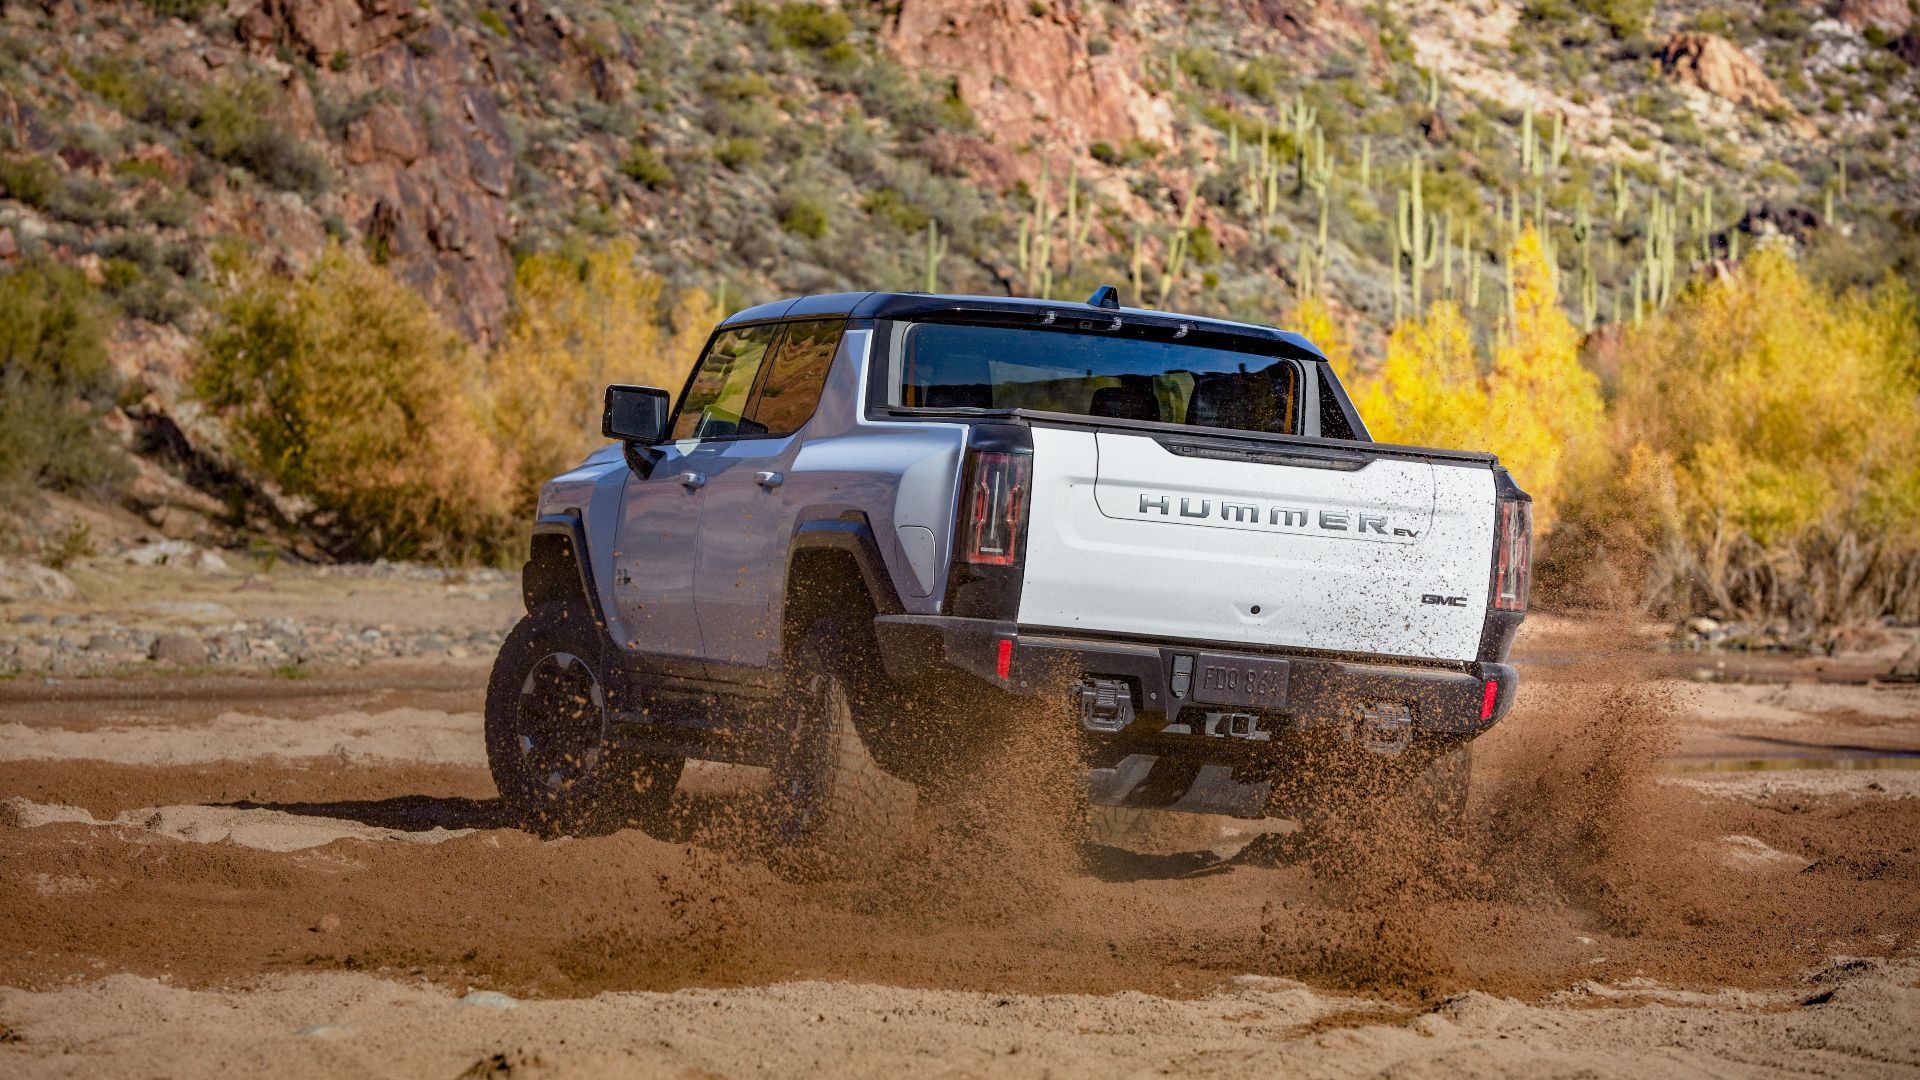 A picture from the side of a Hummer EV off-road